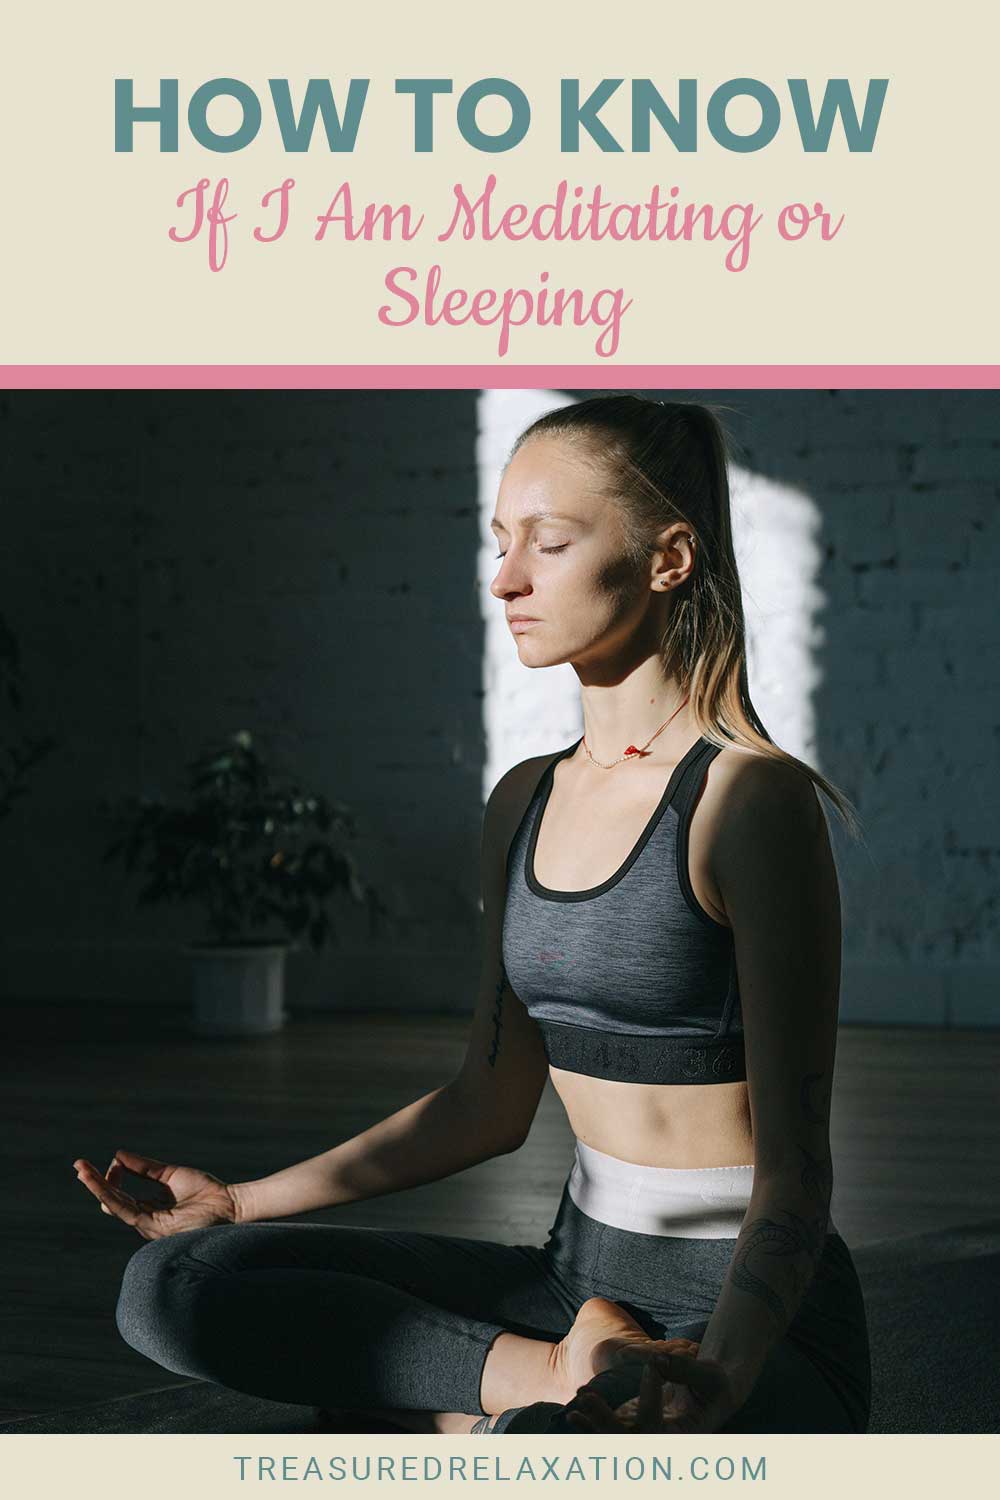 How to Know If I Am Meditating or Sleeping